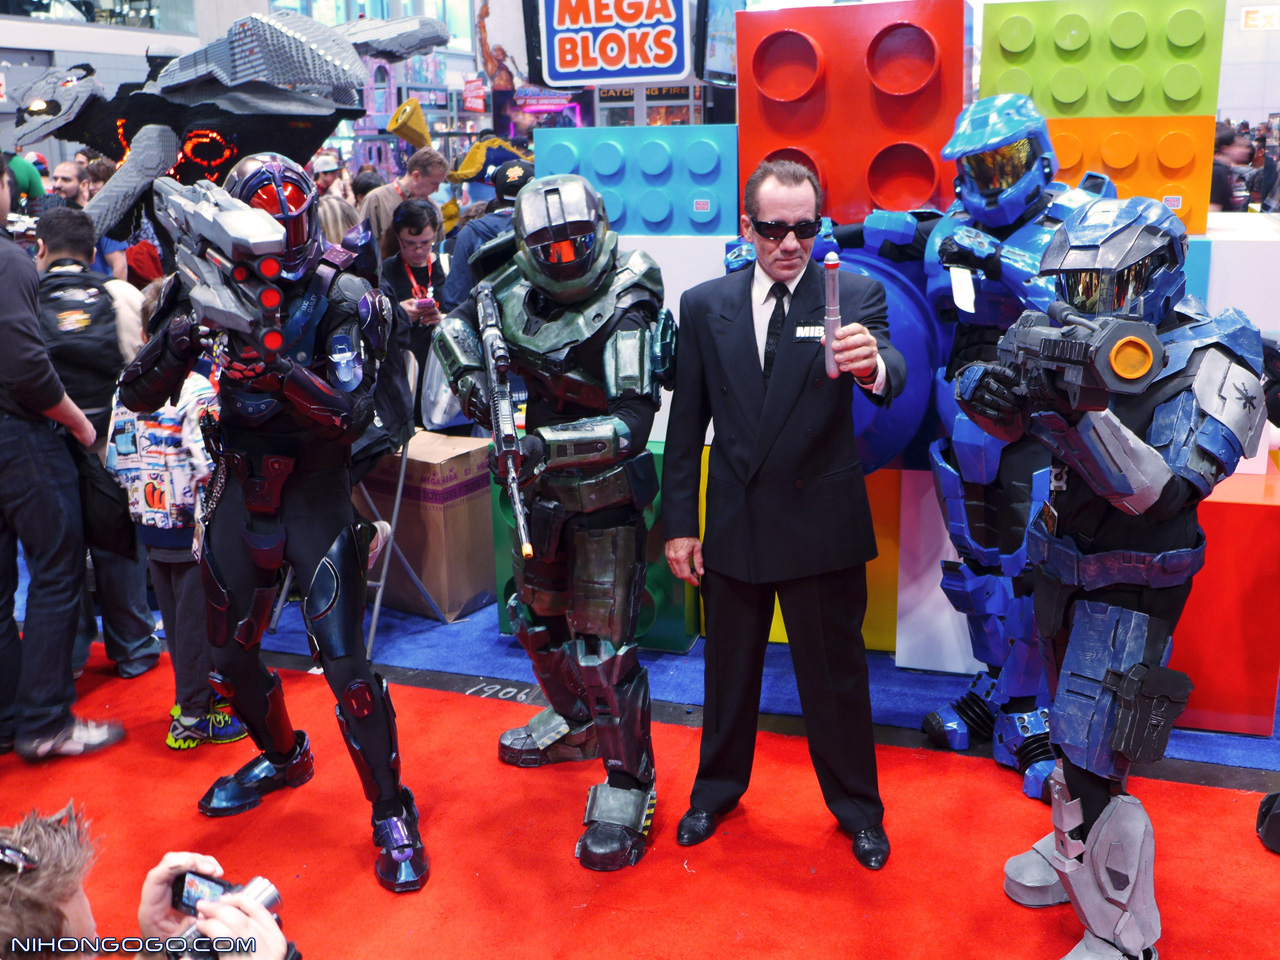 Cosplay-Round-Up-New-York-Comic-Con-2013-Edition-Saturday-Halo-and-MIB-Men-In-Black.jpg